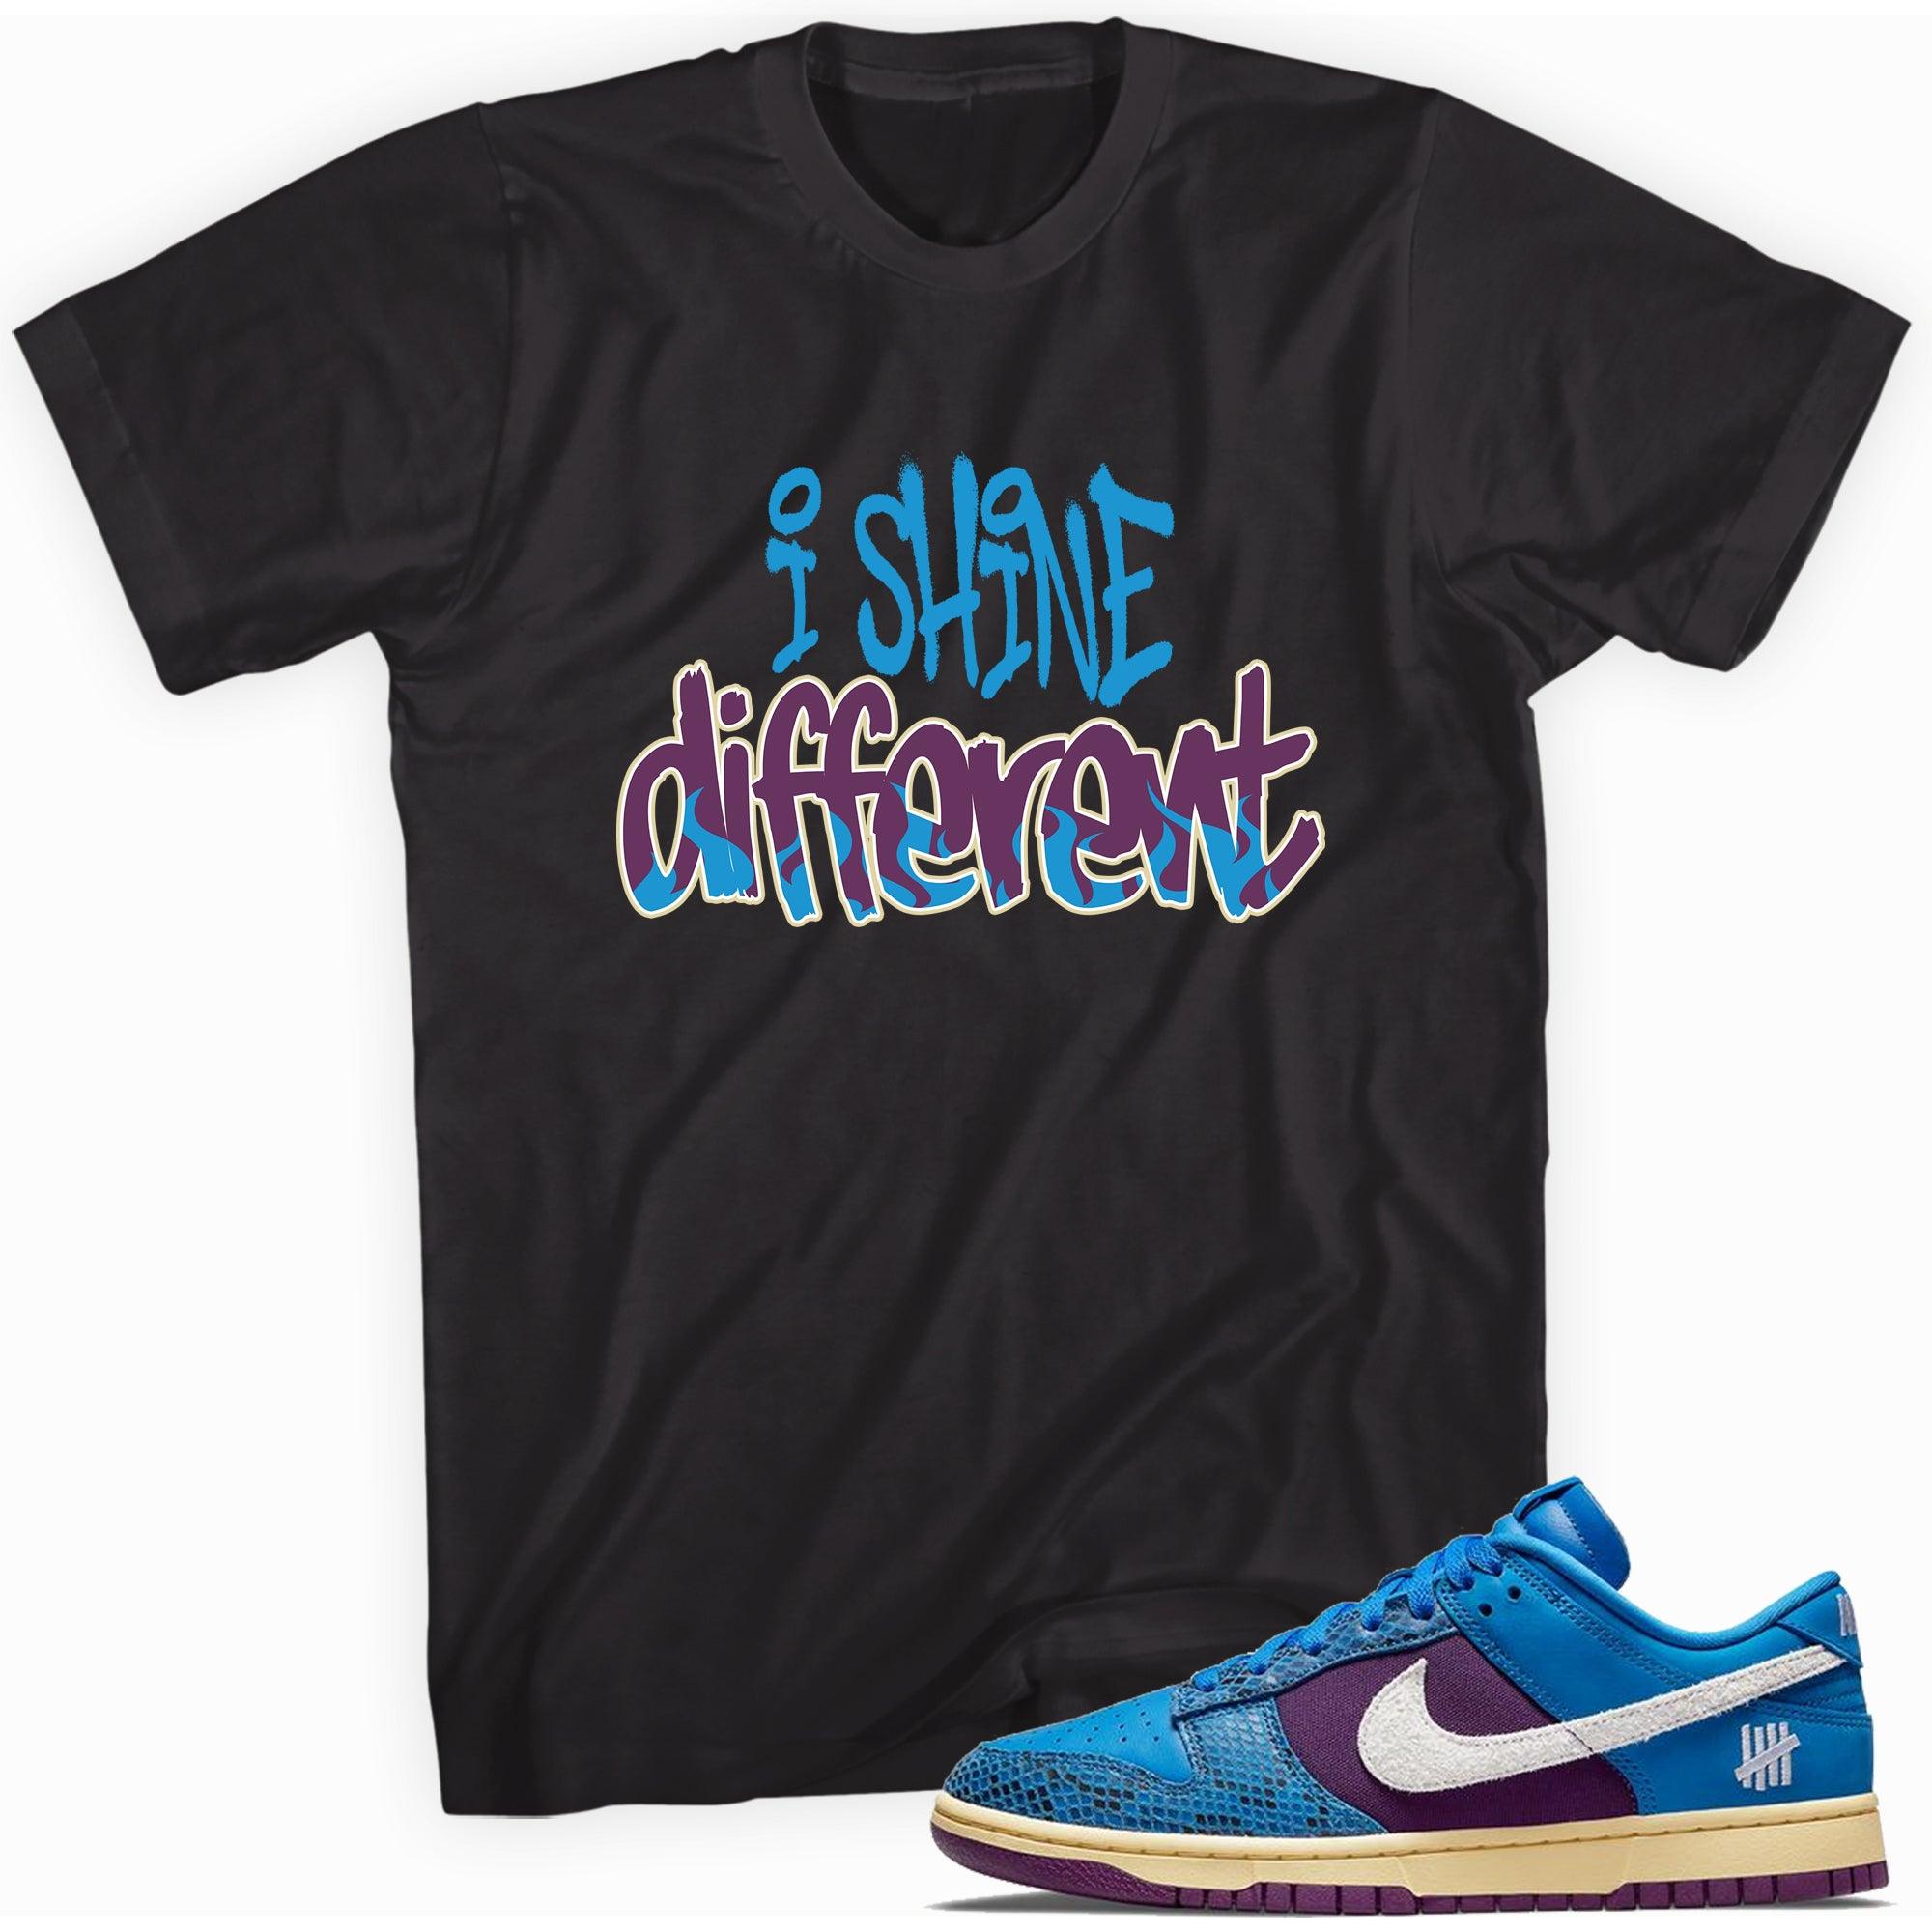 Shine Different Shirt Nike Dunks Low Undefeated 5 On It Dunk vs AF1 photo